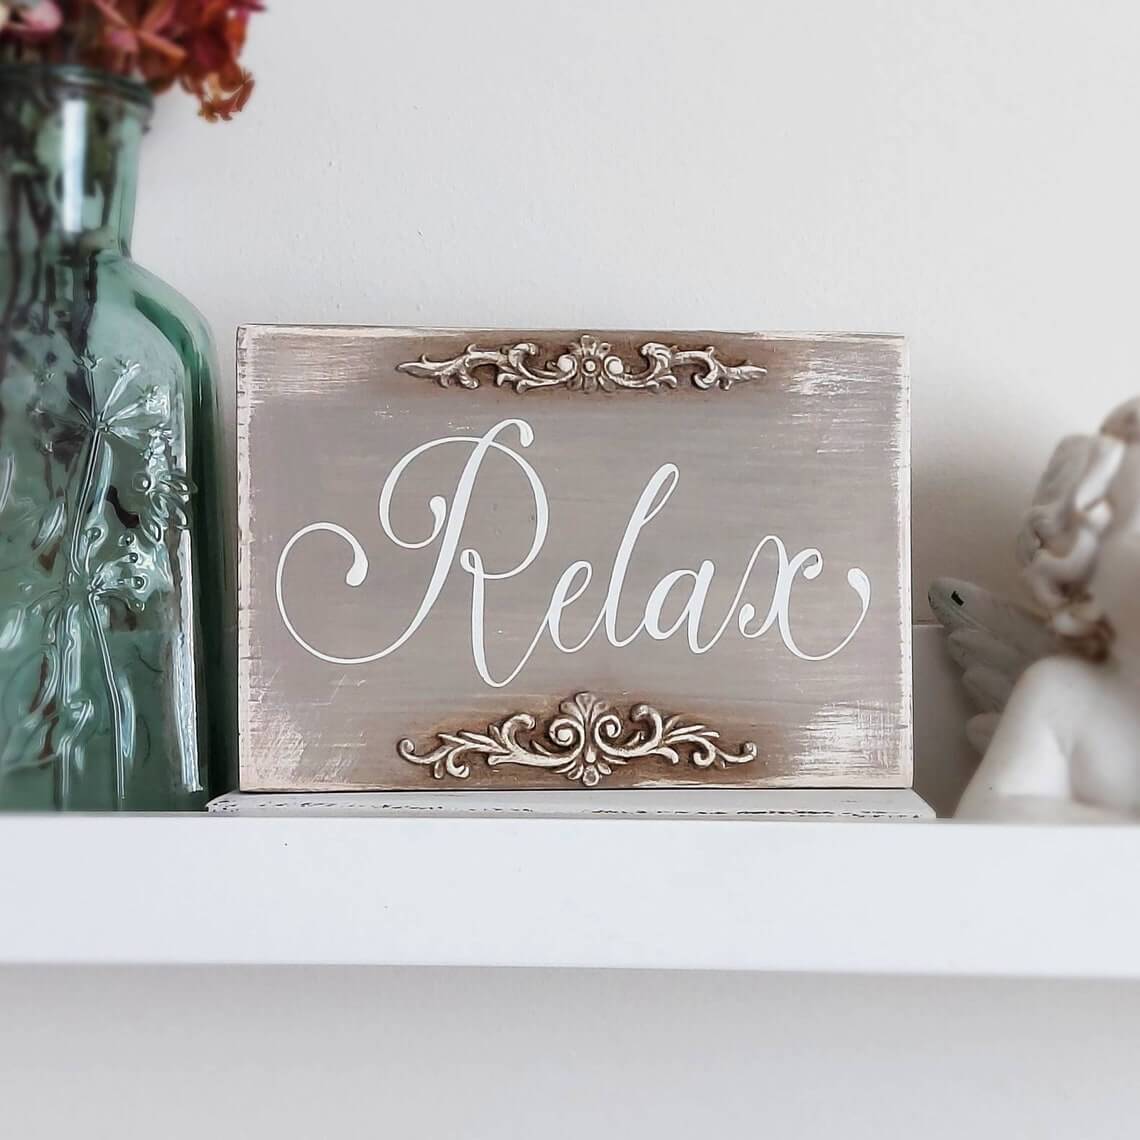 Vintage Victorian Shabby Chic Relax Sign